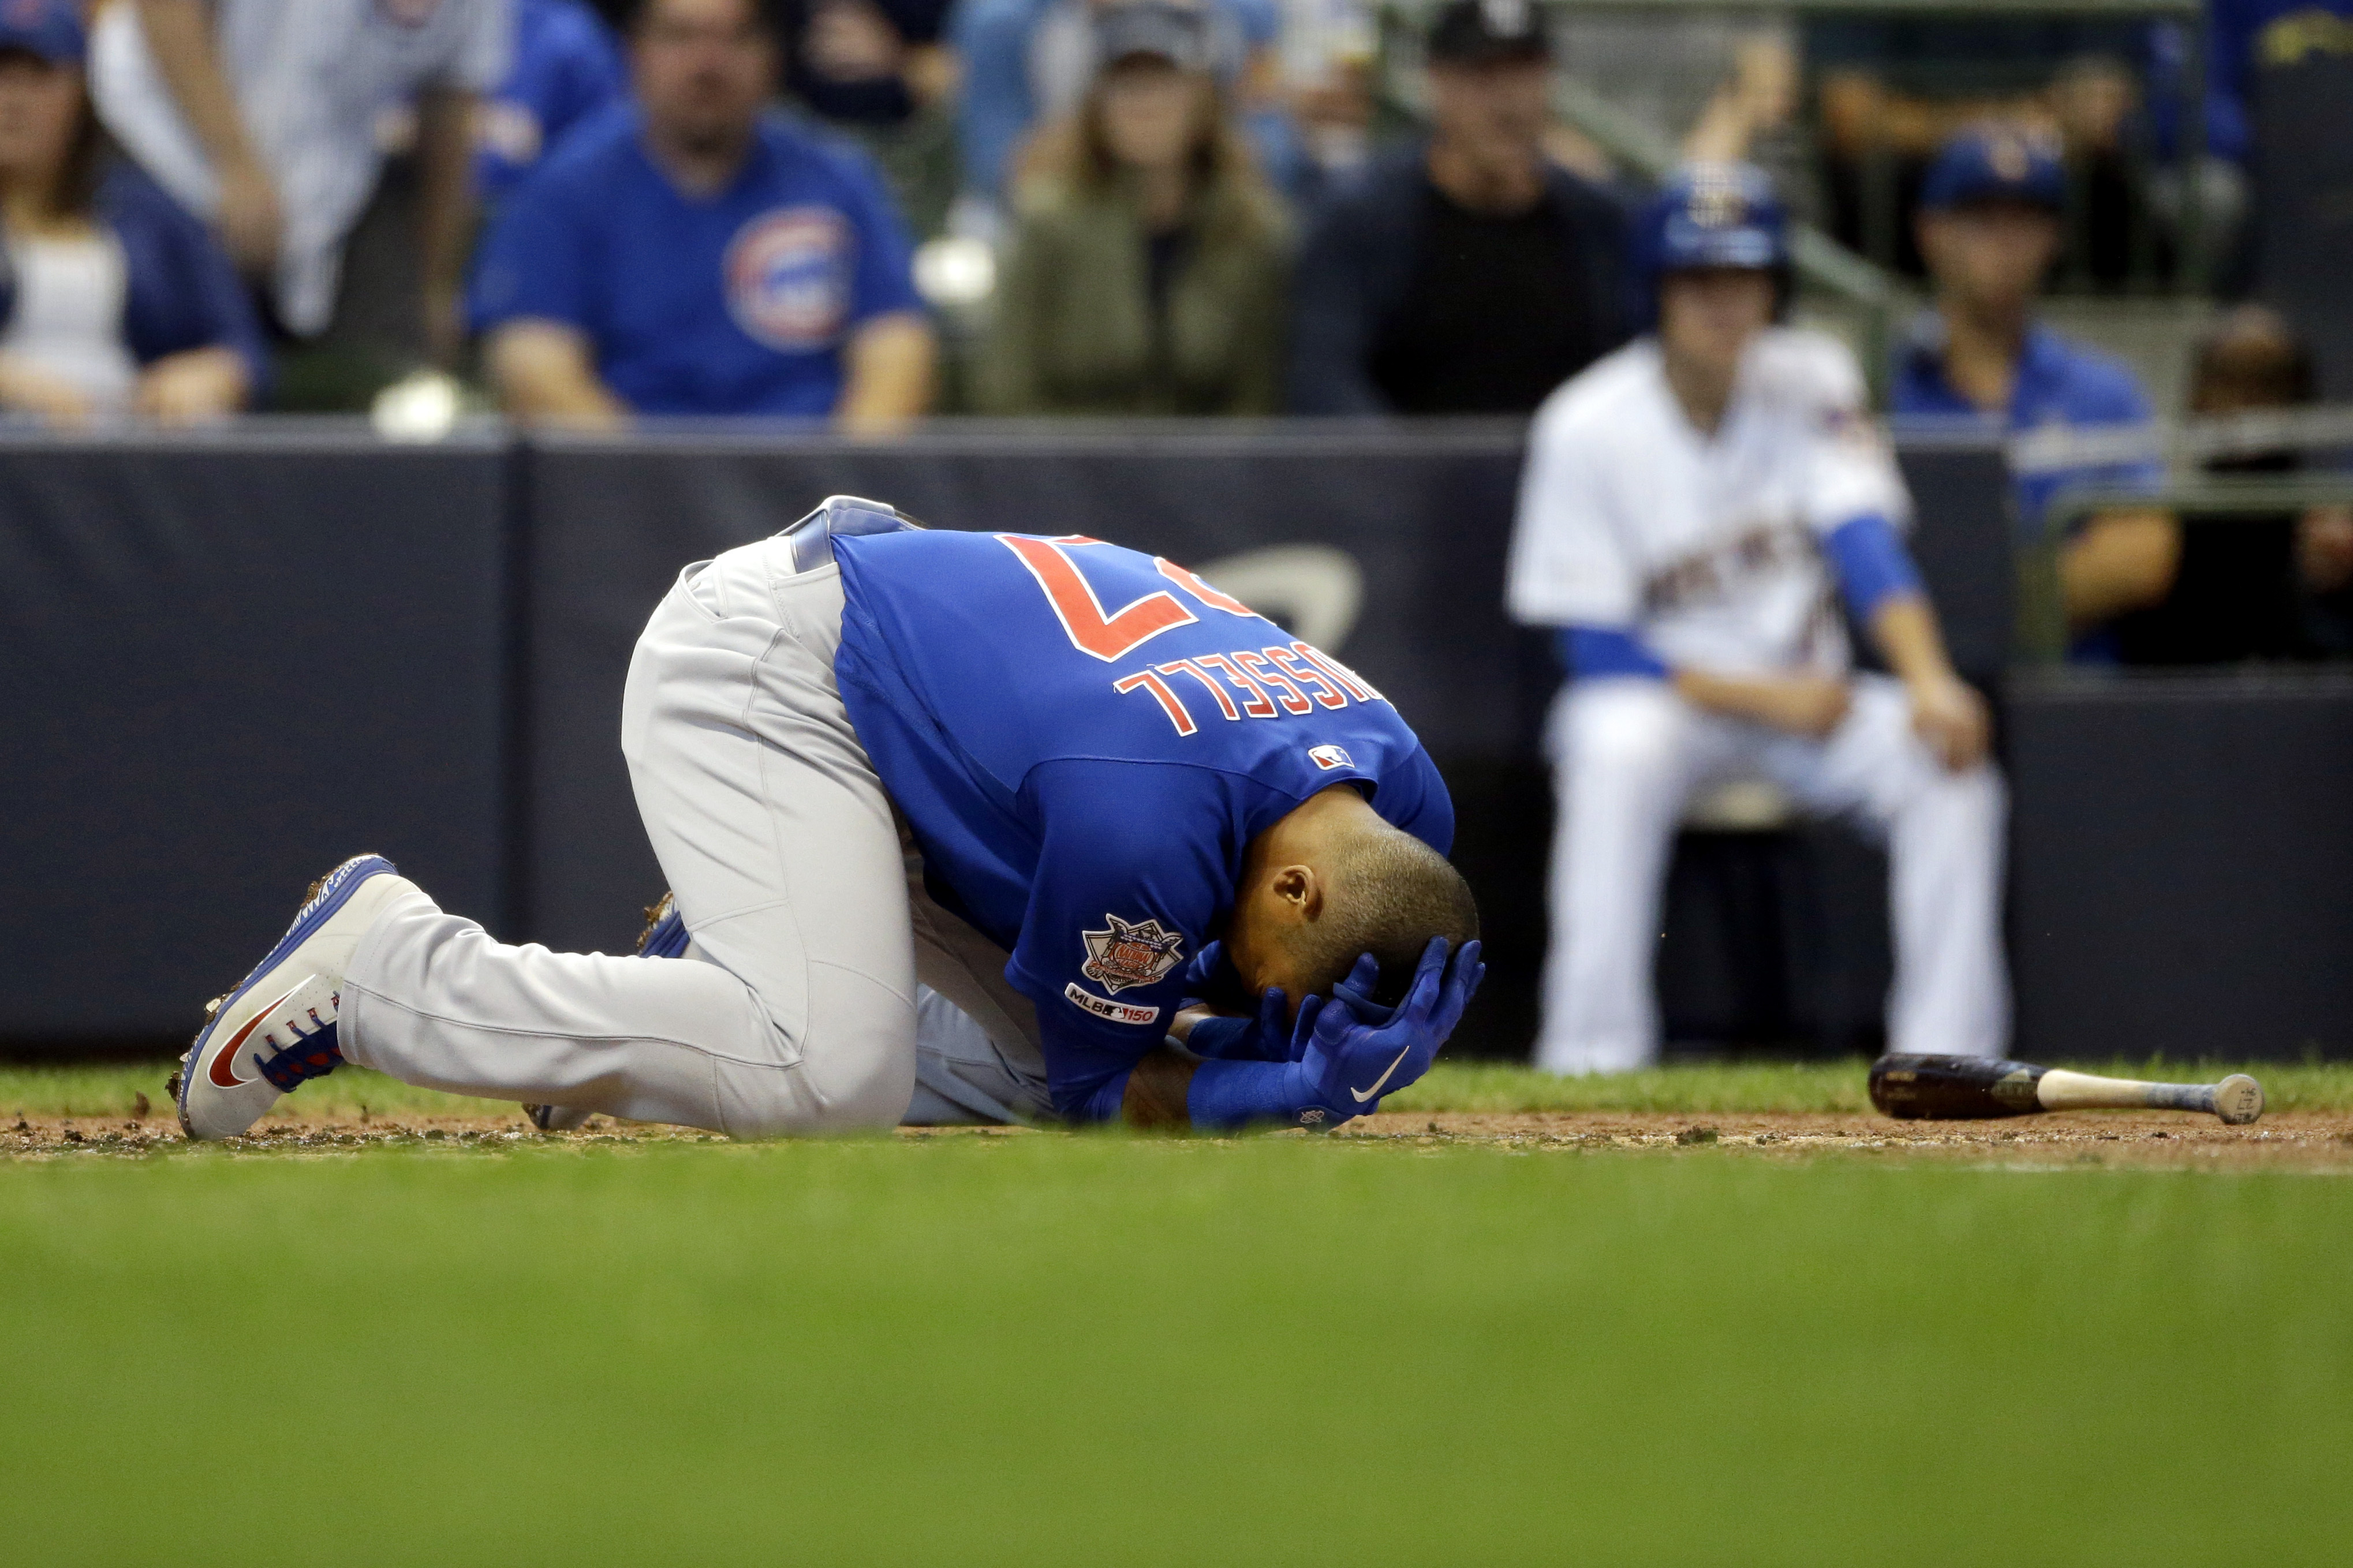 LEADING OFF: Cubs' Russell hit in face, D-backs face deGrom